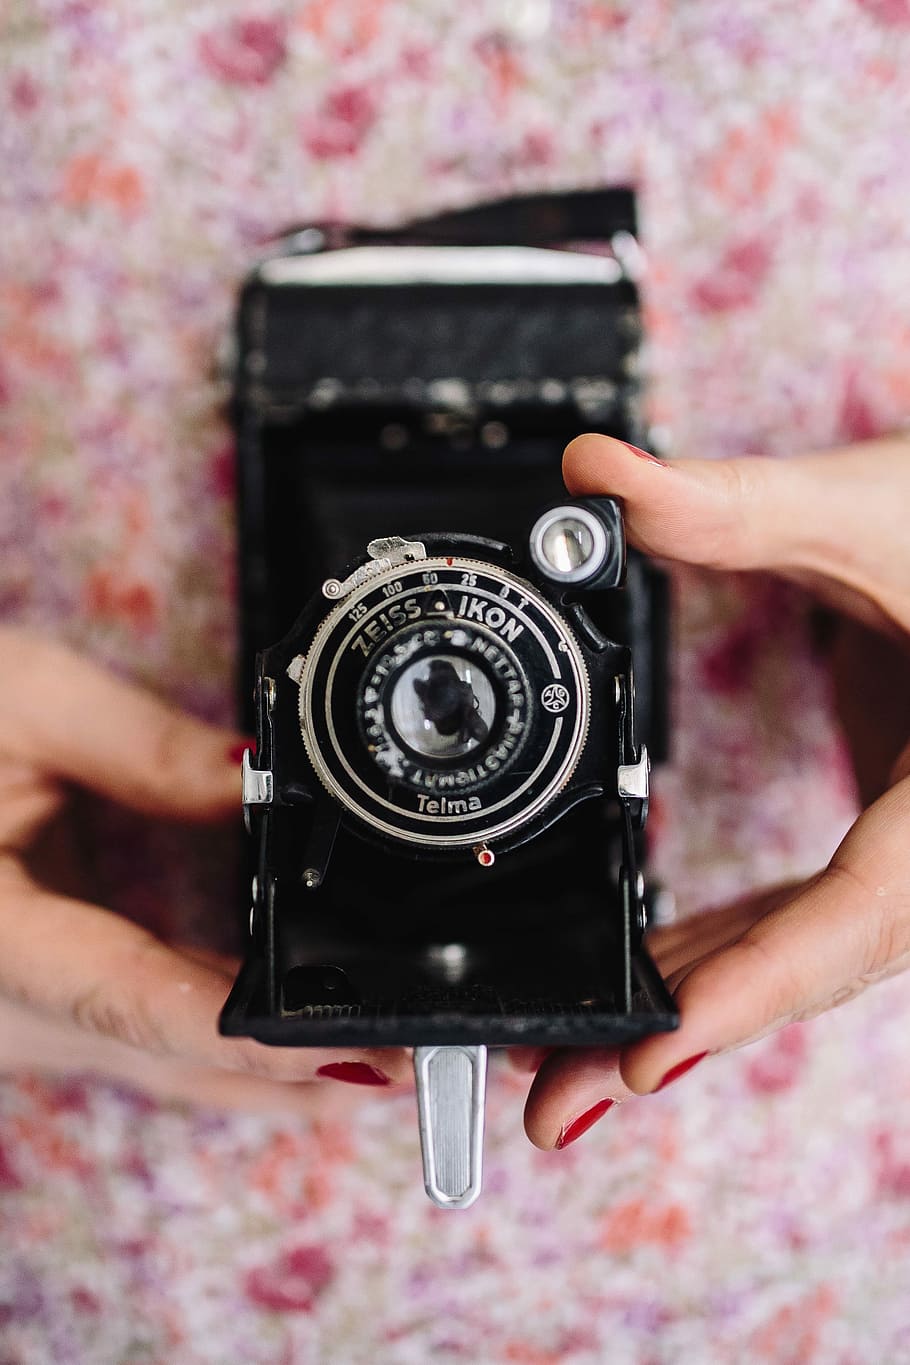 pink, holding, miscellaneous, items, Woman, vintage, camera, photography, photographer, hobby